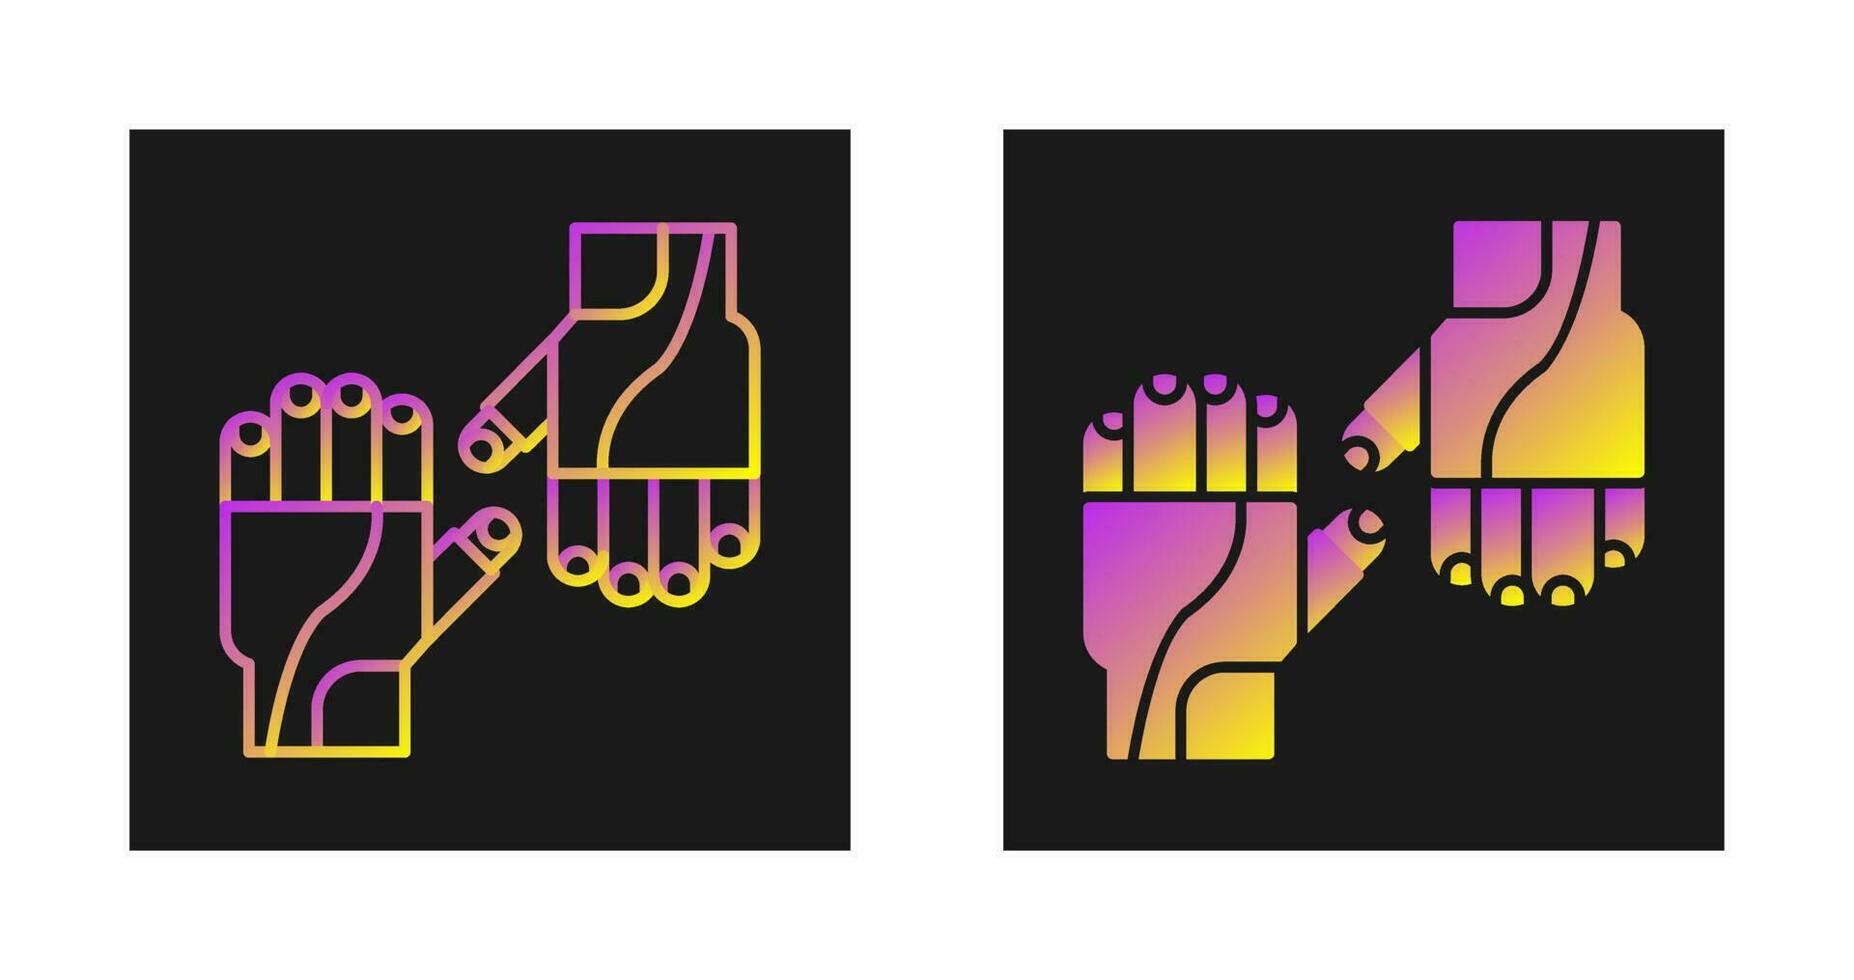 Cycling Gloves Vector Icon